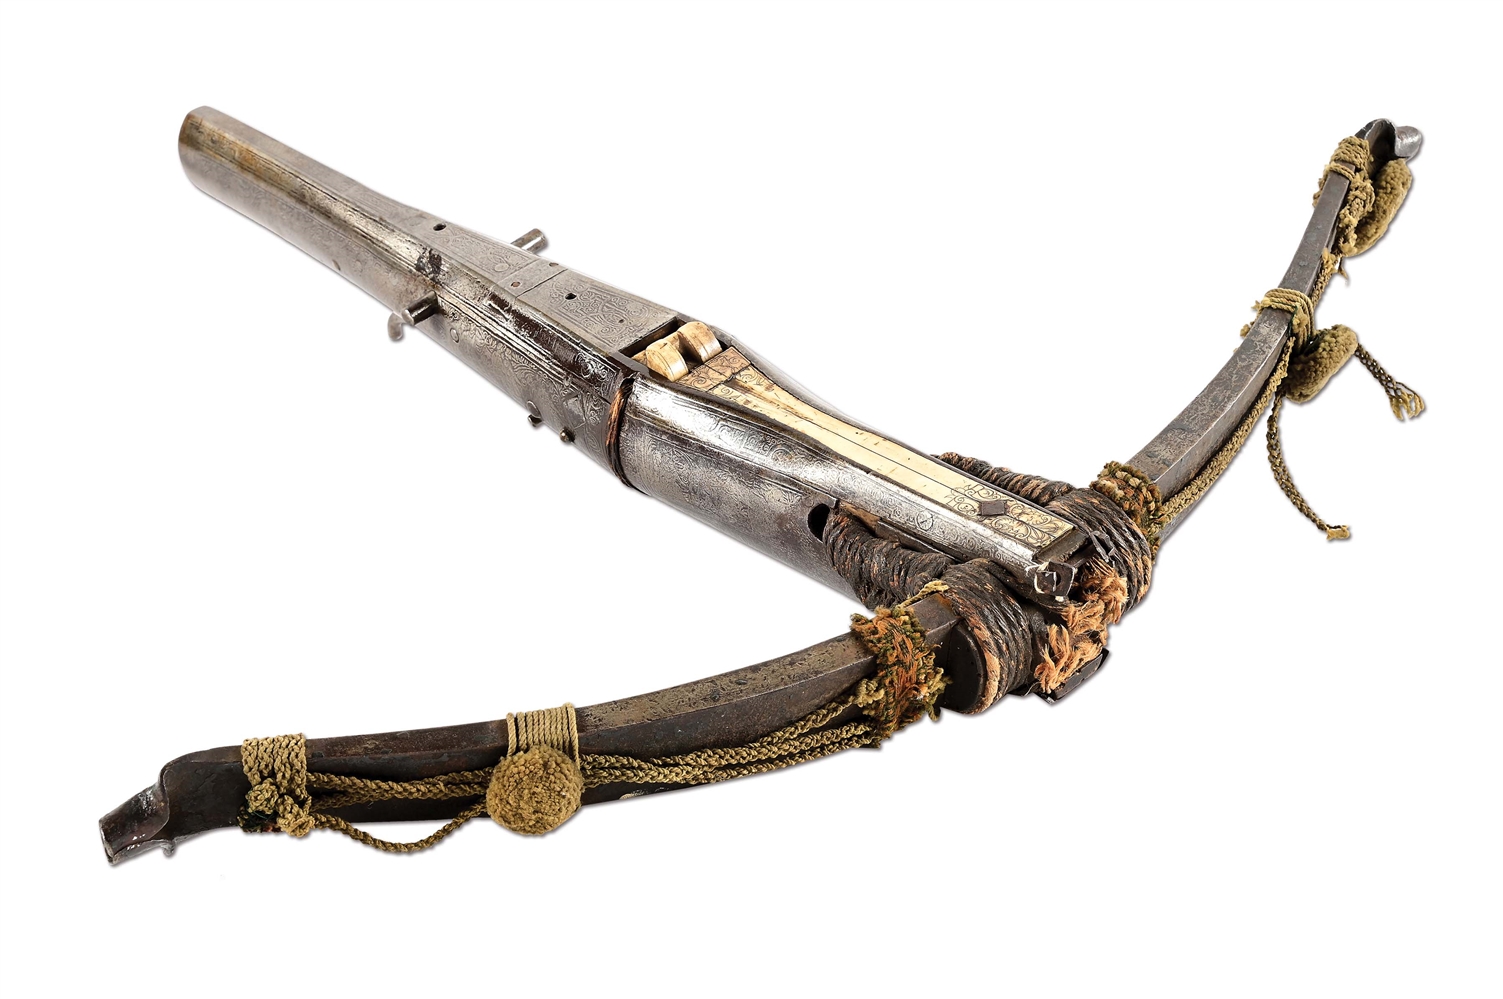 AN EXTREMELY RARE, LATE 16TH CENTURY, GERMAN SHEET STEEL COVERED CROSSBOW, ACID ETCHED THROUGHOUT, ATTRIBUTED TO ULRICH KRELL, WITH CRANEQUIN, EX. LATTIMER.